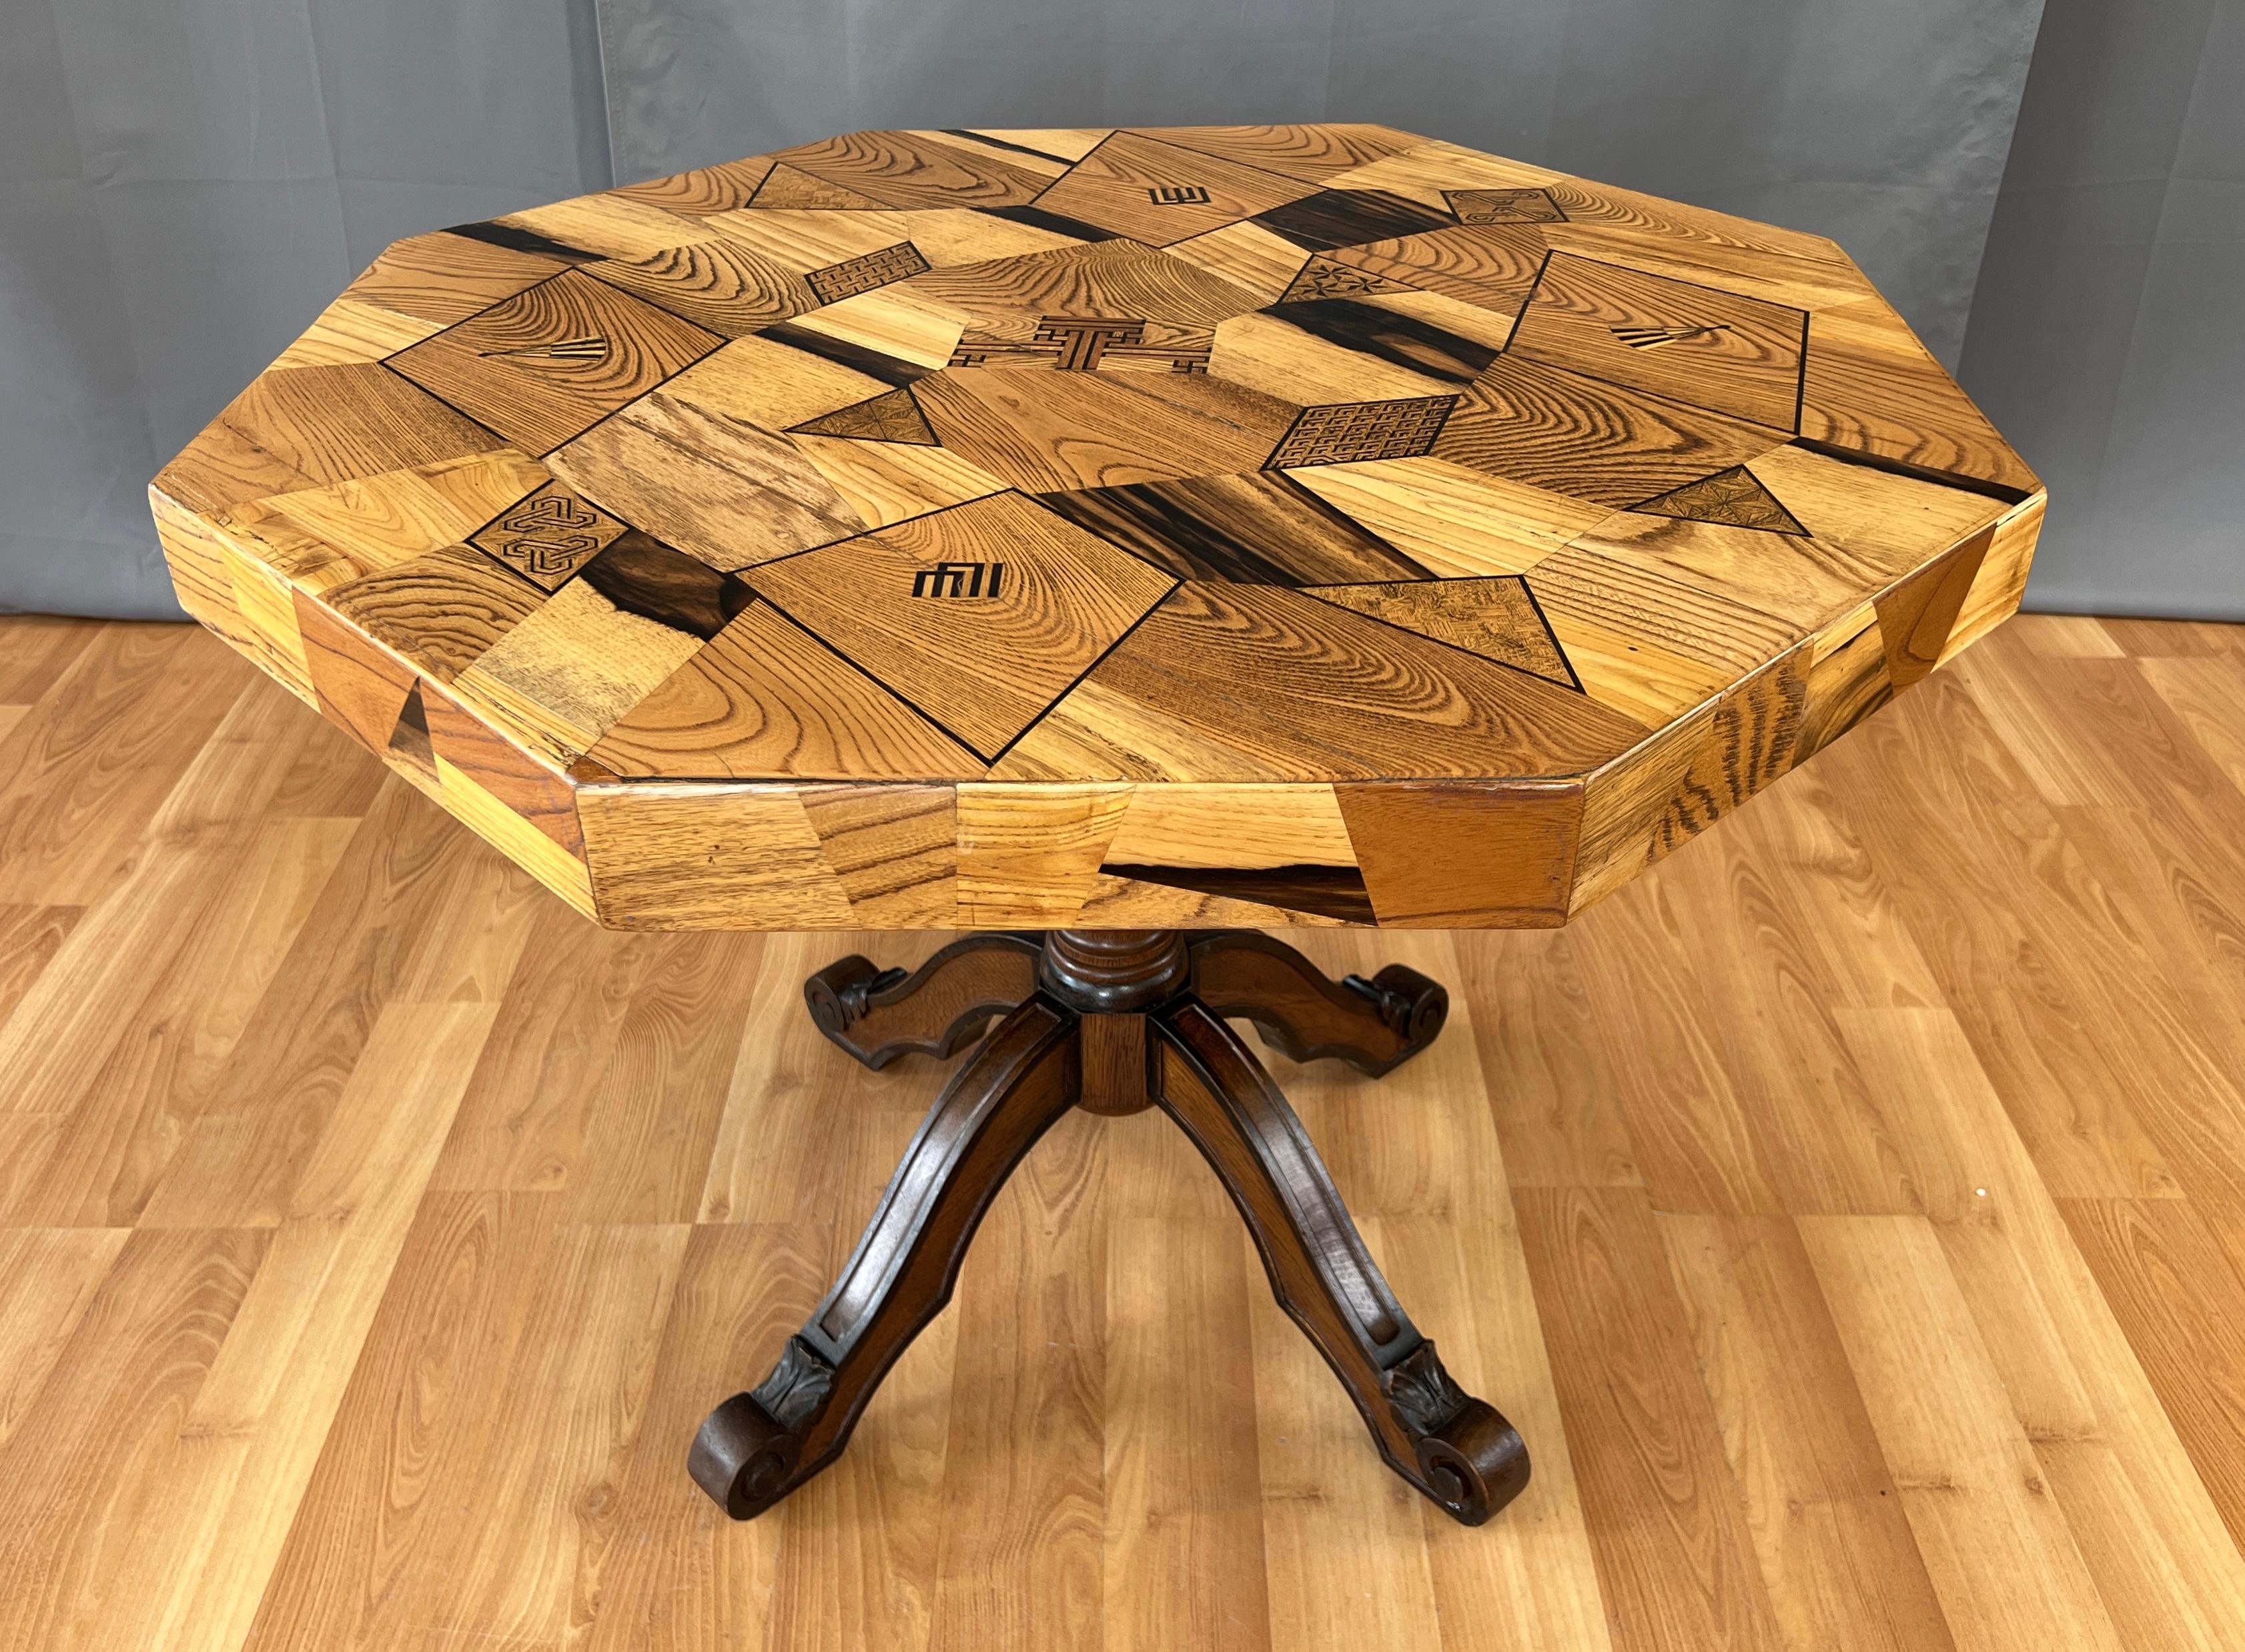 Offered here is a late 19th or early 20th century Japanese marquetry table, with a hexagonal shape top.
Variety of woods was used, and fine detailed craftsmanship to make this table. 
Different patterns, designs and symbols, makes a wonderful